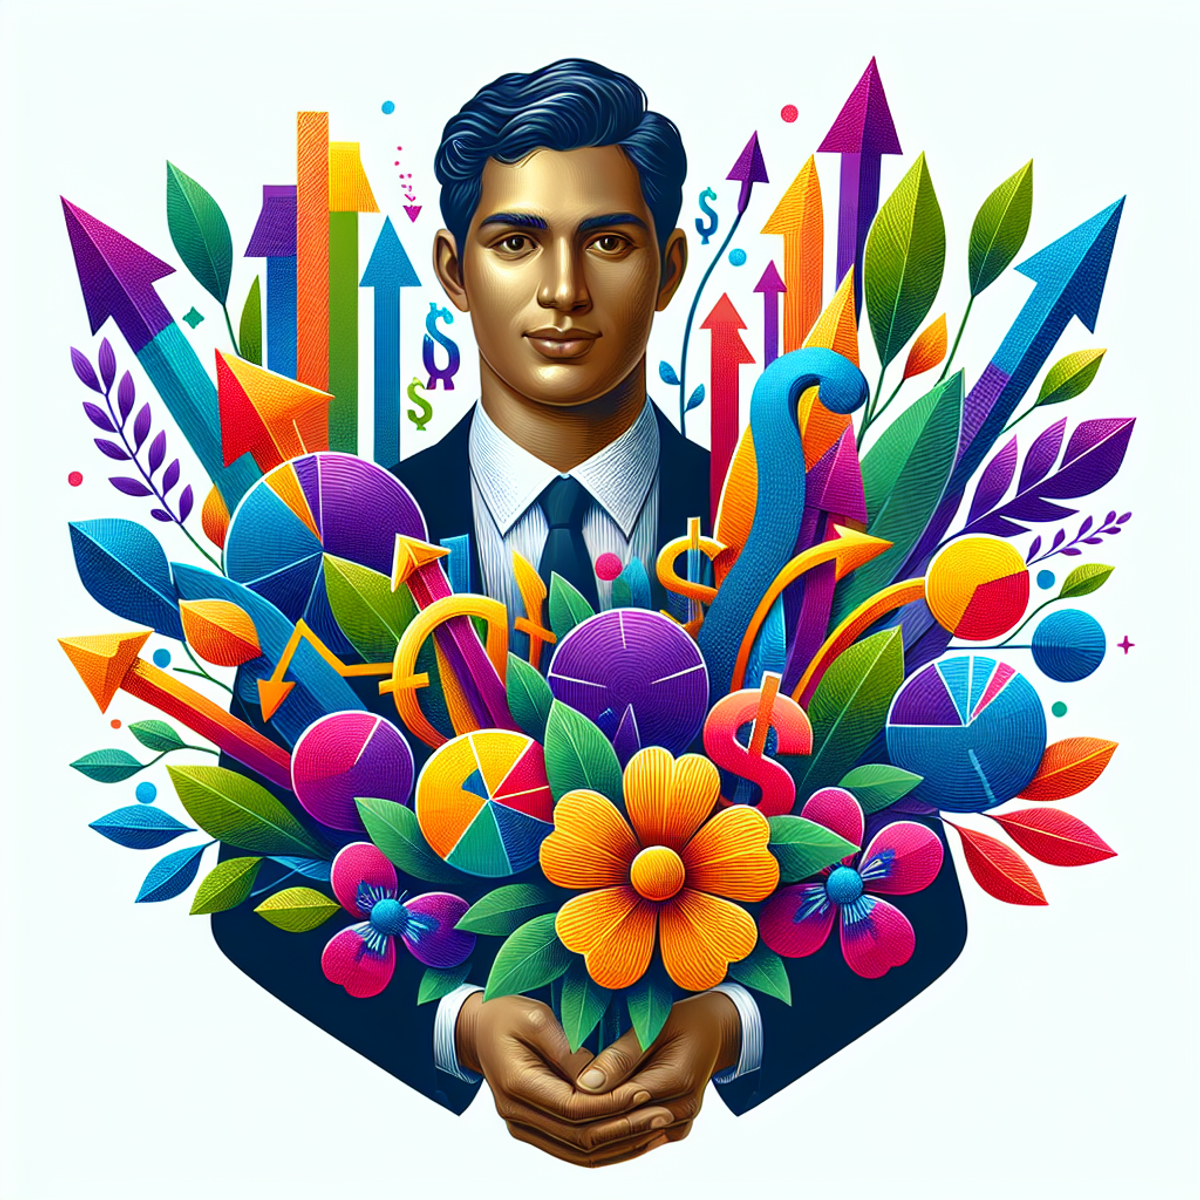 A person of South Asian descent in business attire holding a bouquet made of financial symbols such as dollar signs, arrows, pie charts, and bar graphs.